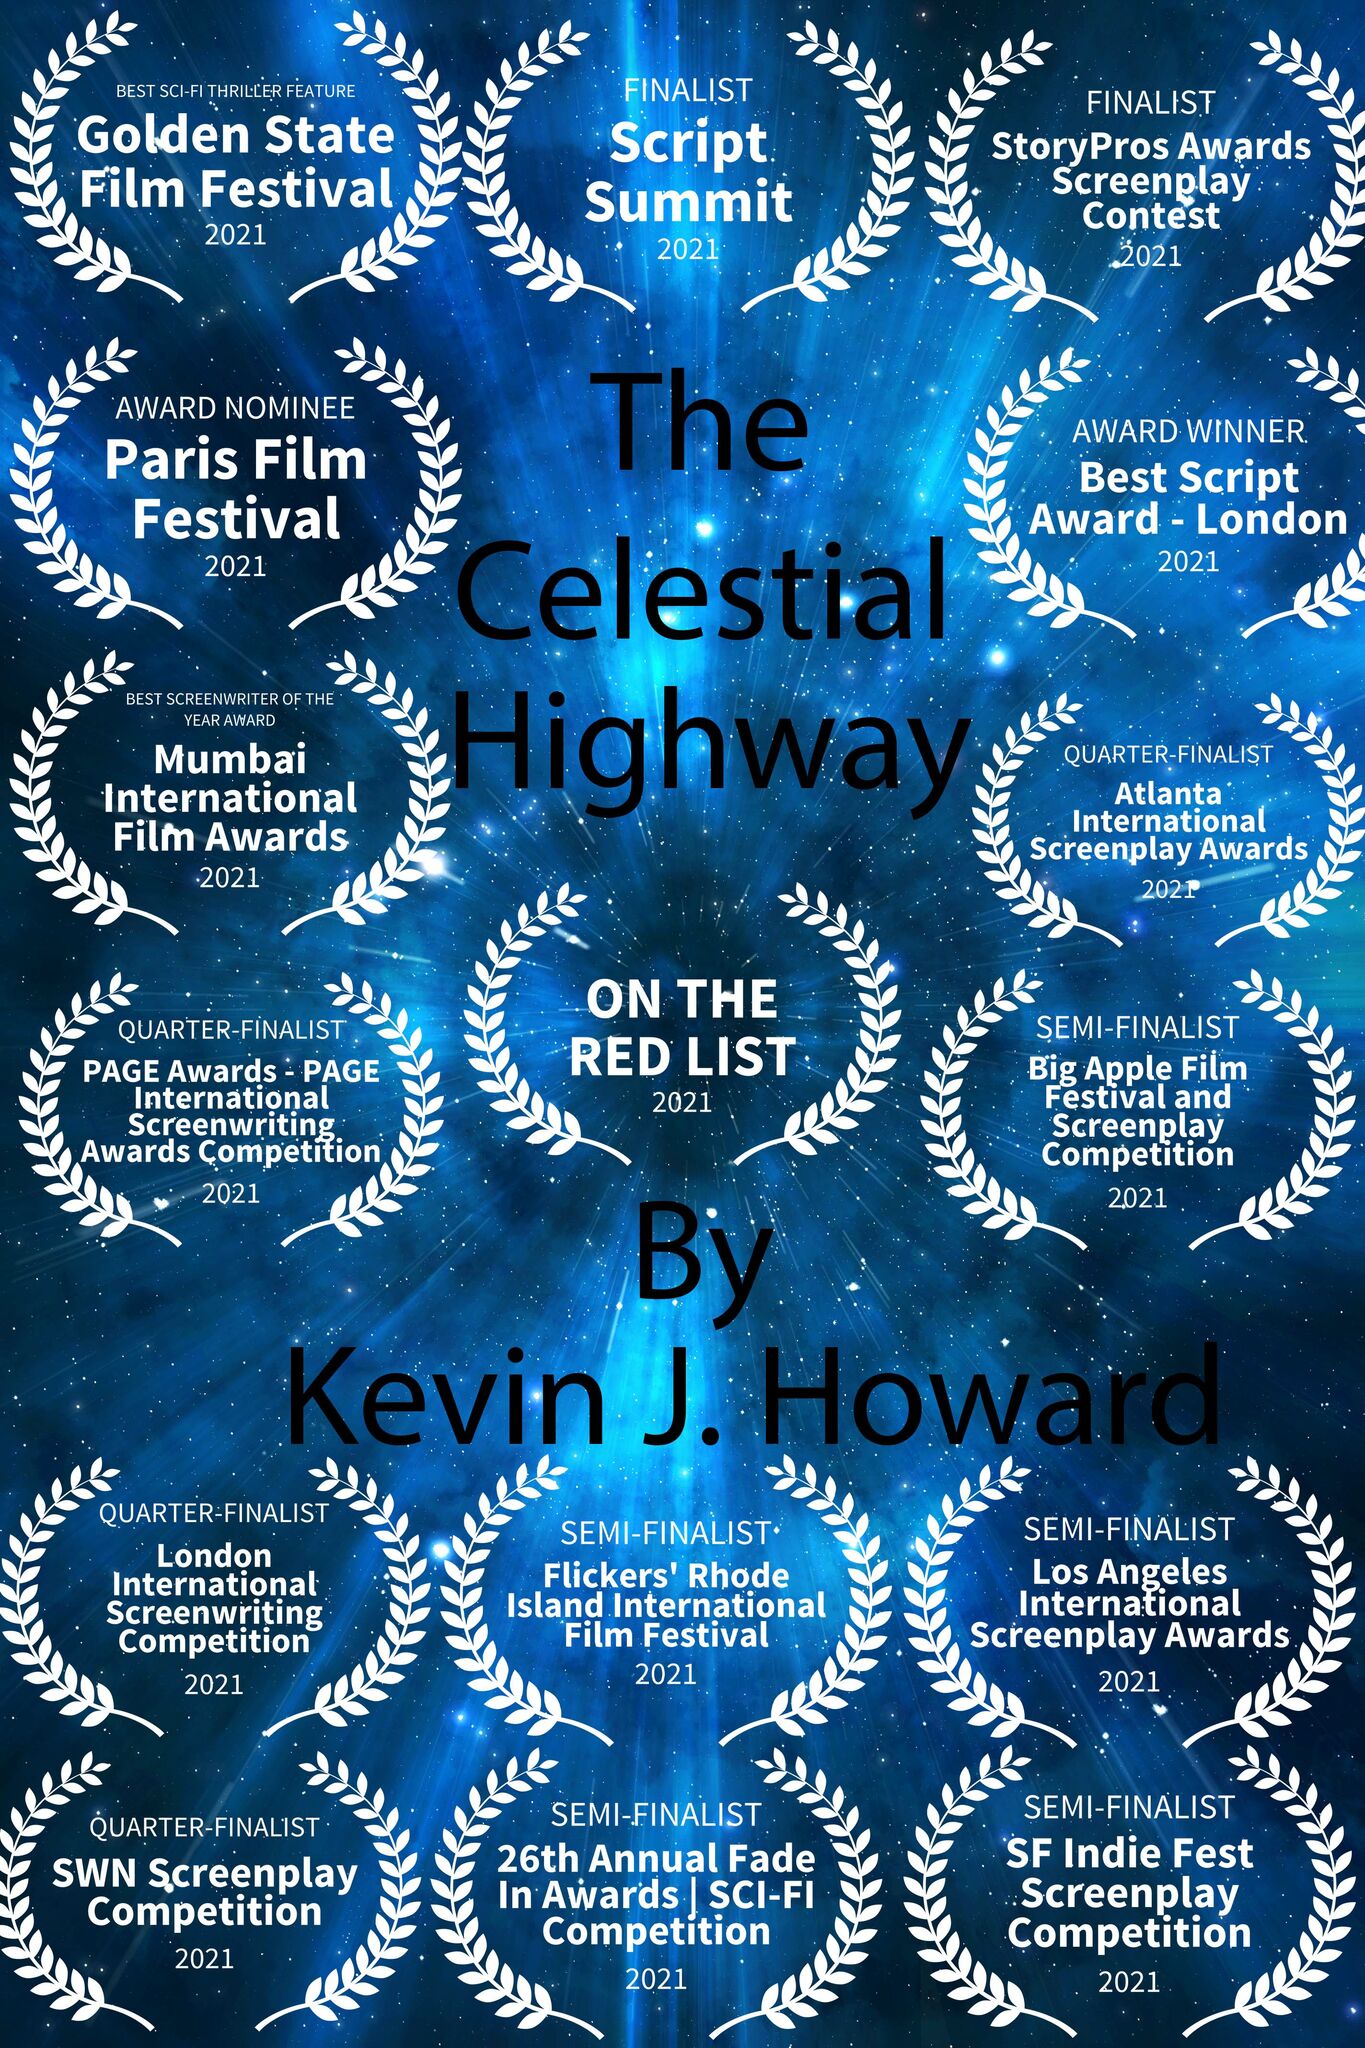 THE CELESTIAL HIGHWAY